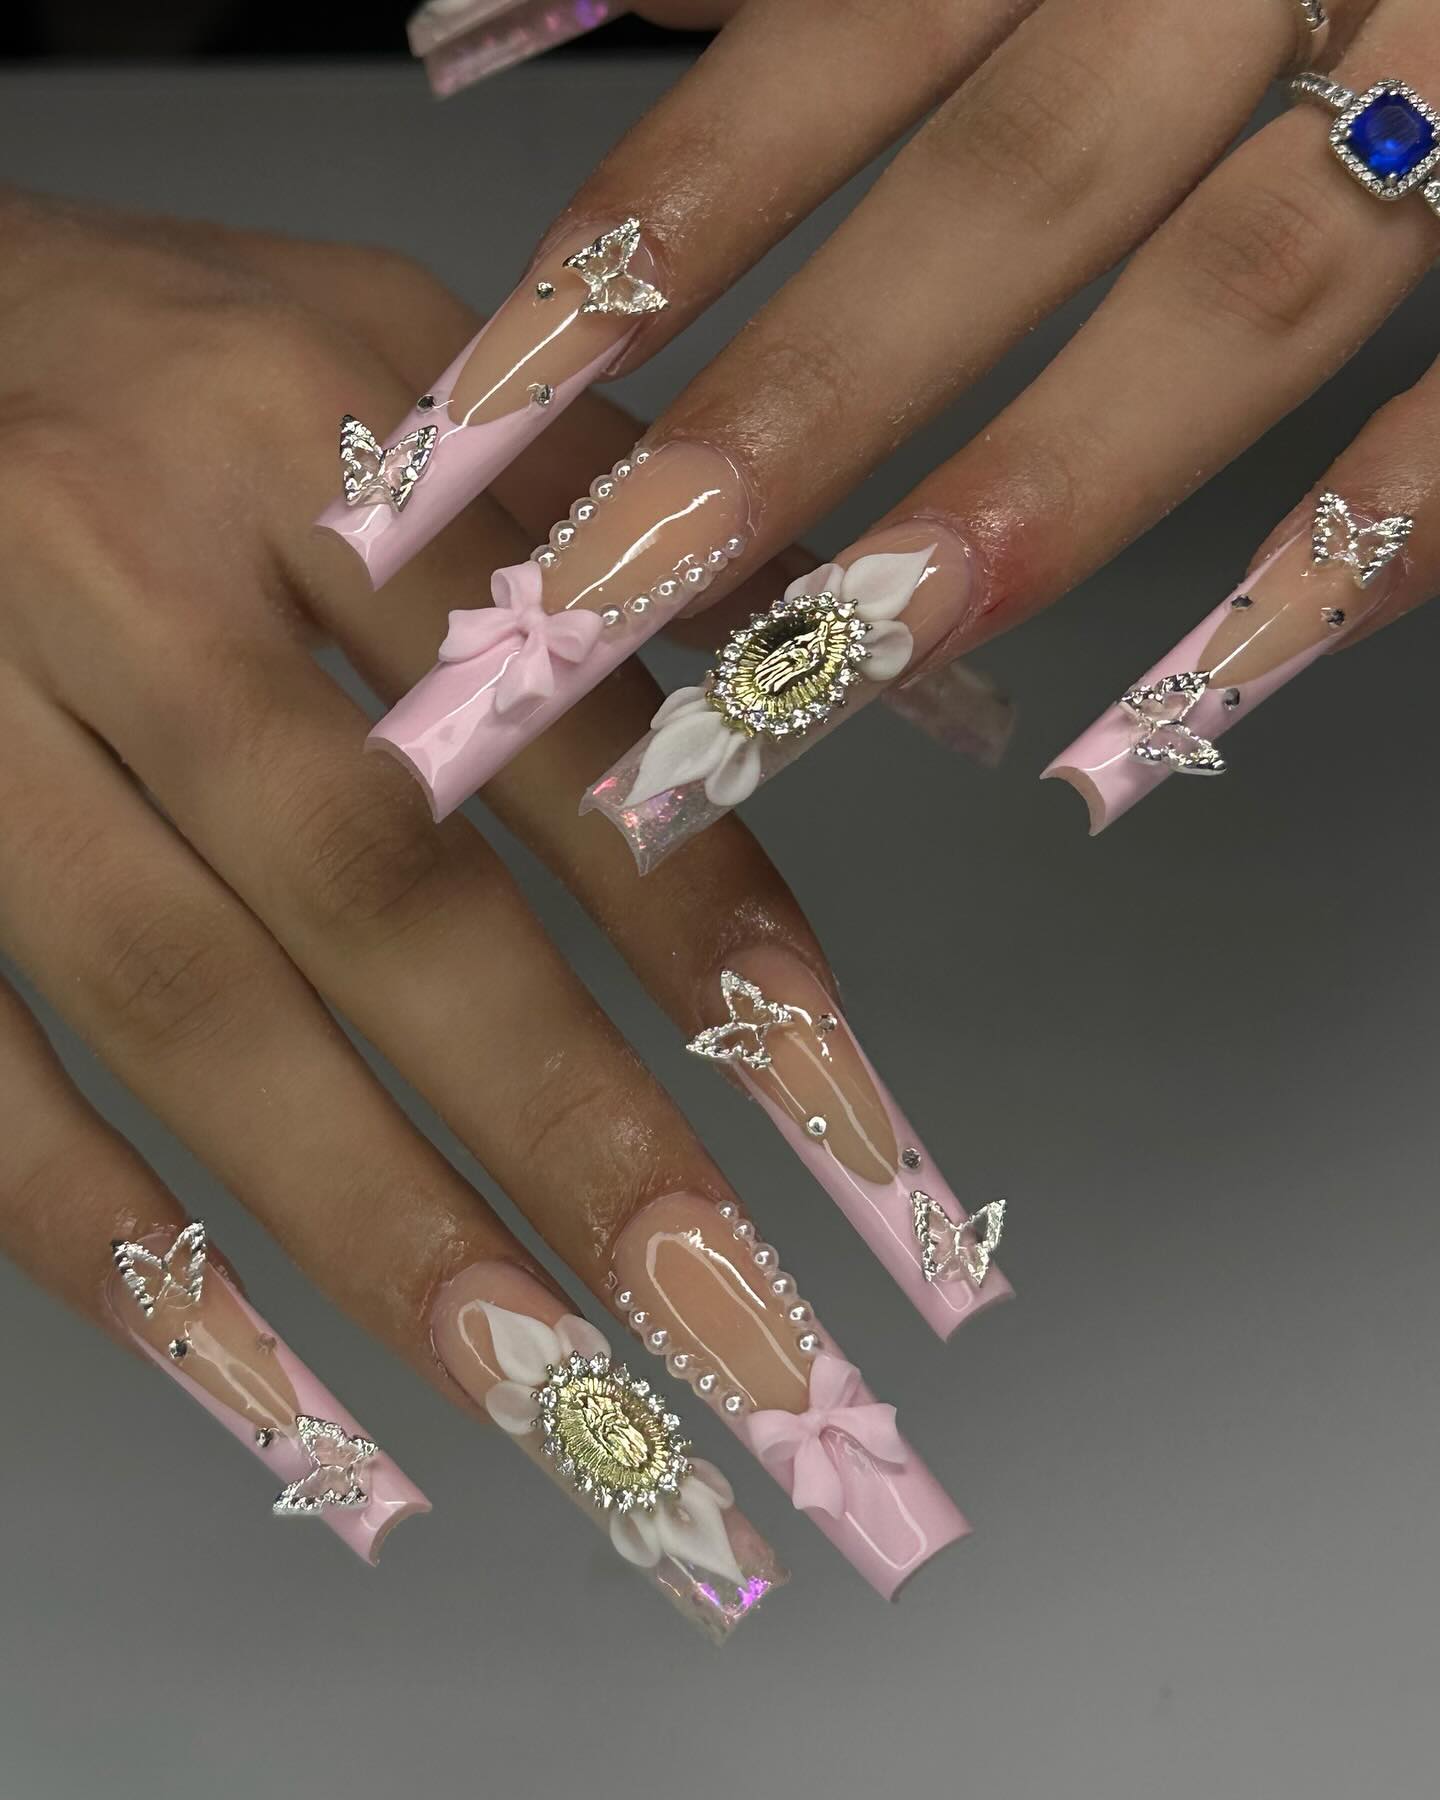 3D Glamorous Nude Nails With Nail Charms